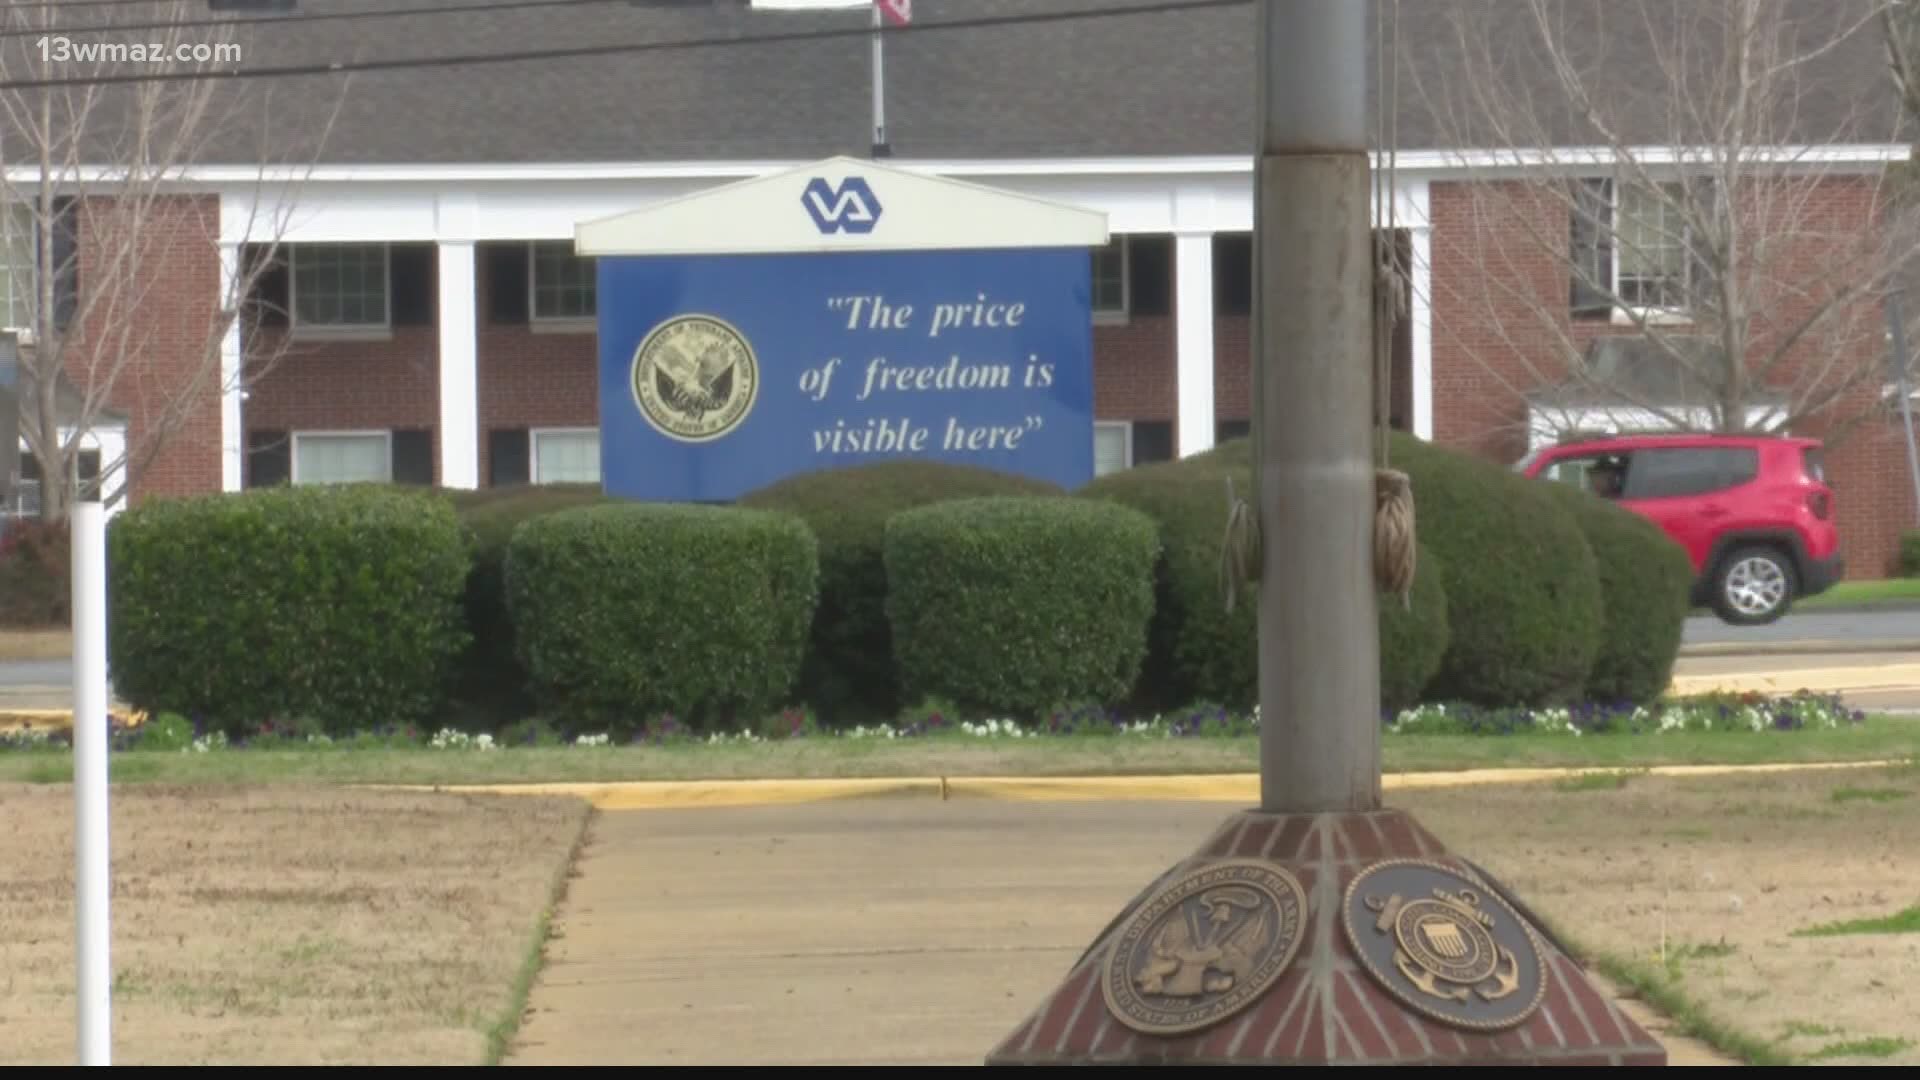 The Carl Vinson VA Medical Center in Dublin is allowing some volunteers back into the building starting August 31st.